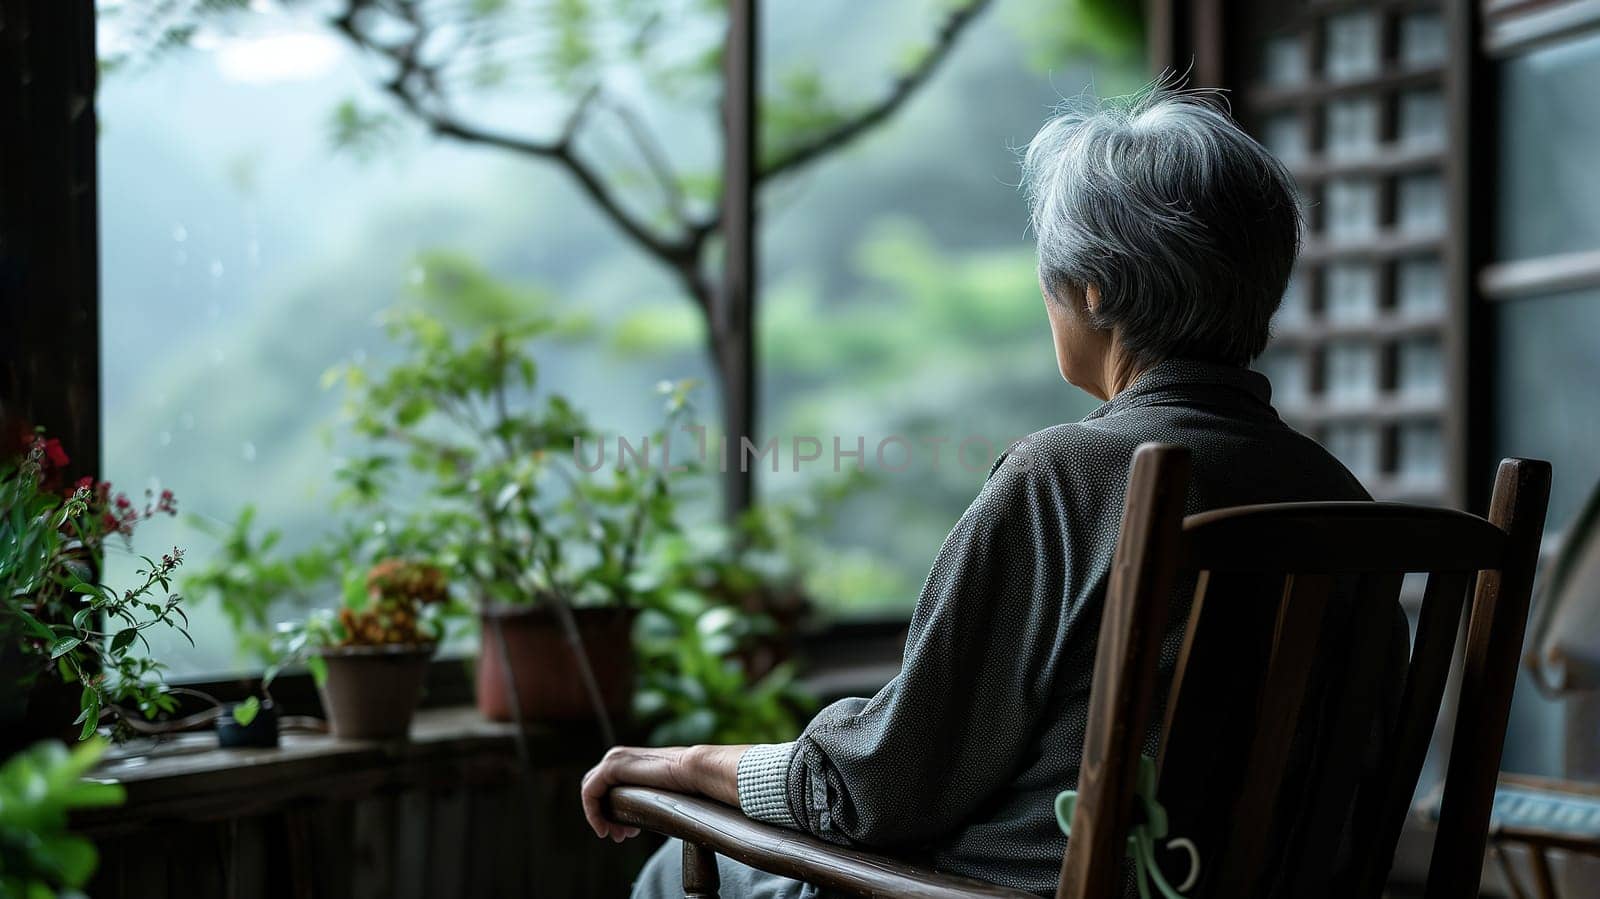 Memory Loss. Back View Lonely Old Asian Woman With Gray Hair Sits In Chair in Dark Room with Potted Flowers. Later life, Aging Crisis Or Alzheimer Disease Concept. AI Generated. Horizontal Plane by netatsi